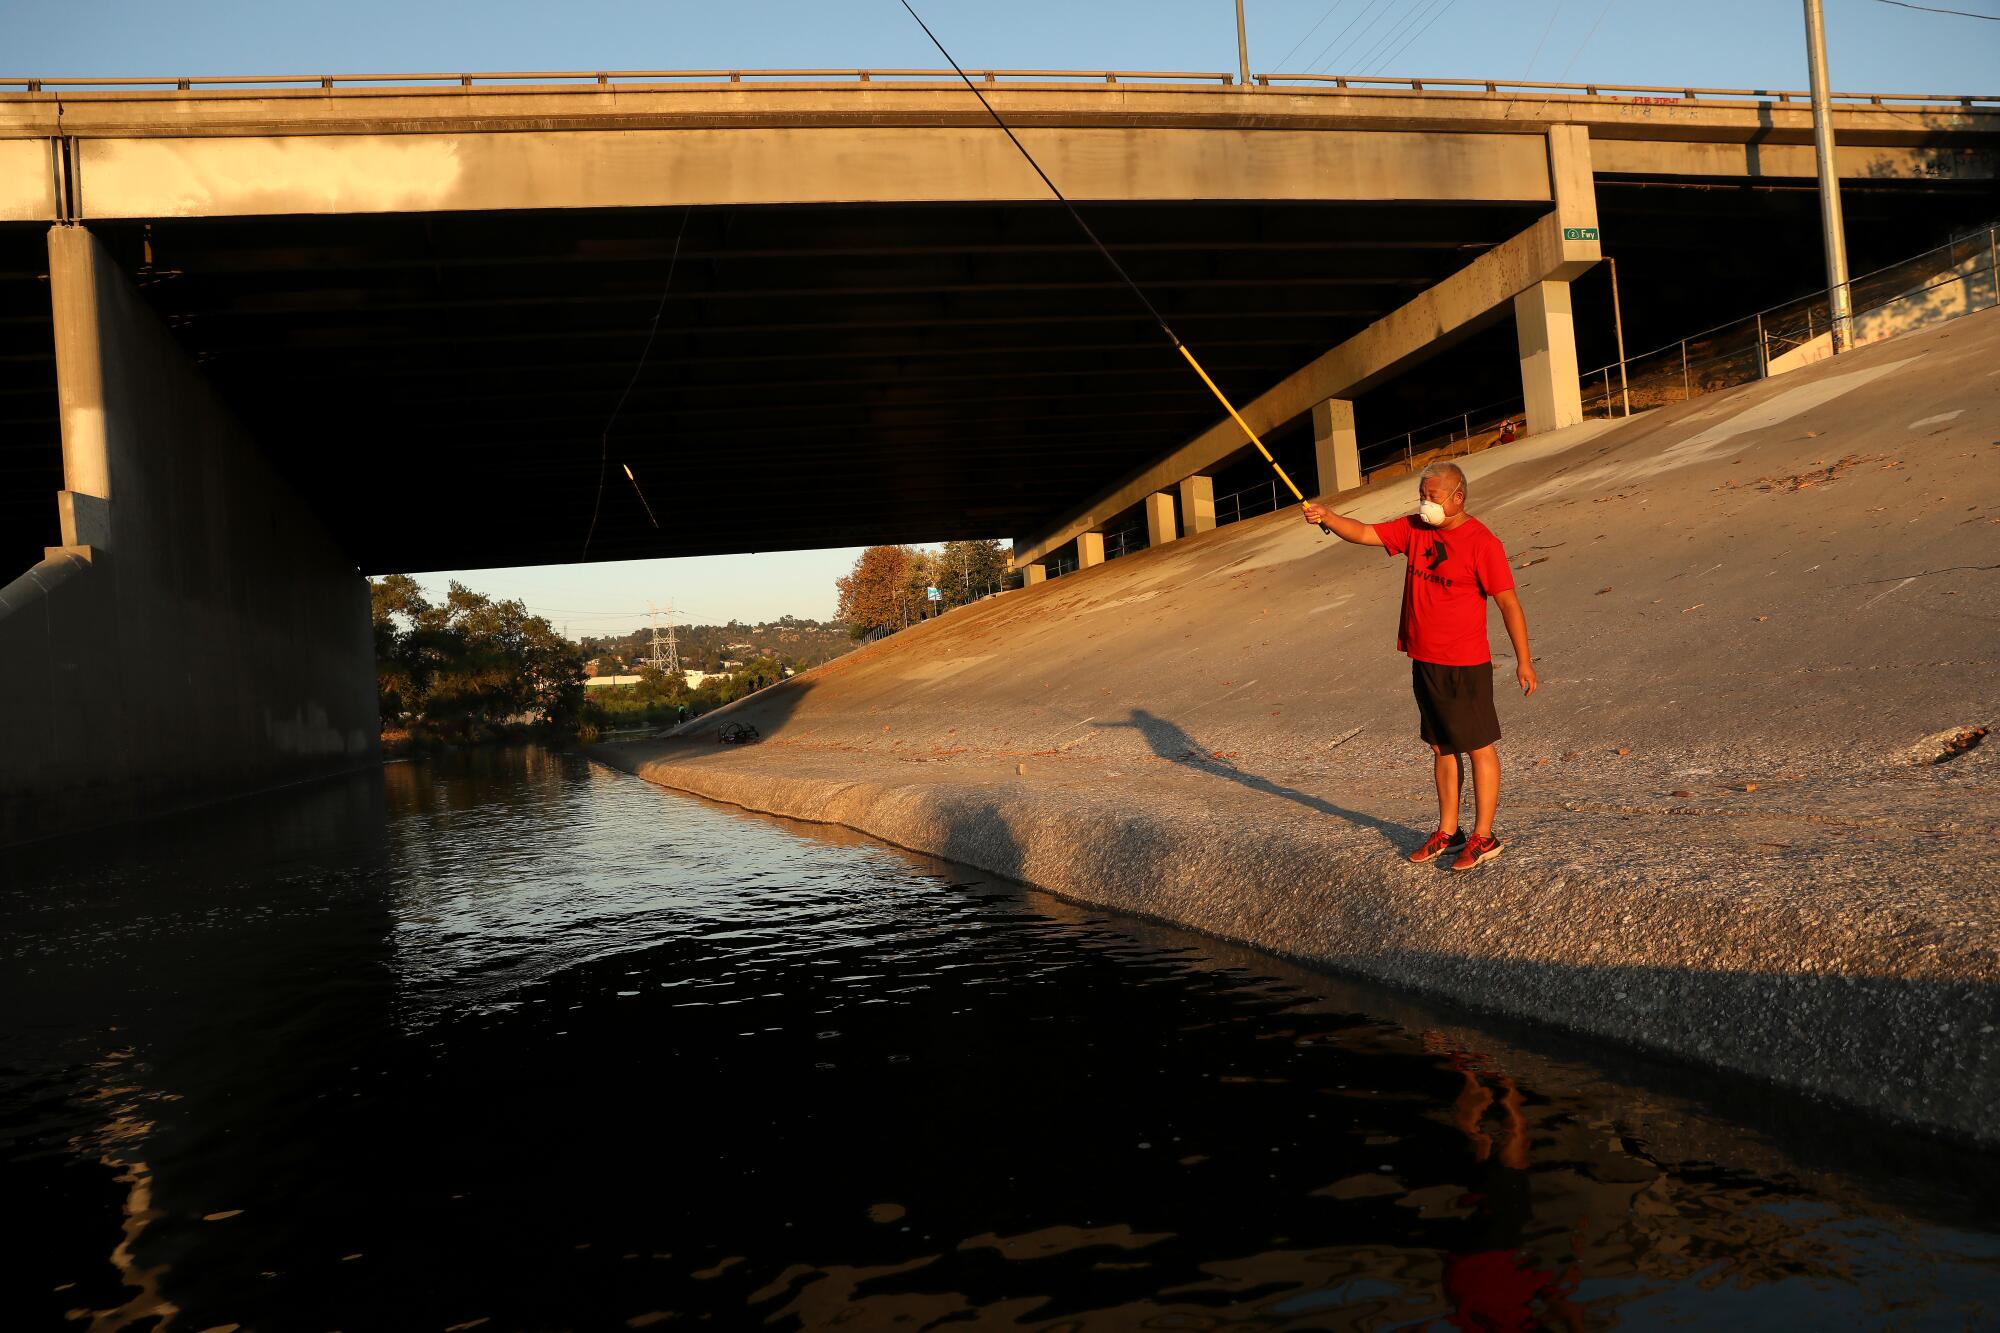 A man fishes the Los Angeles River in July